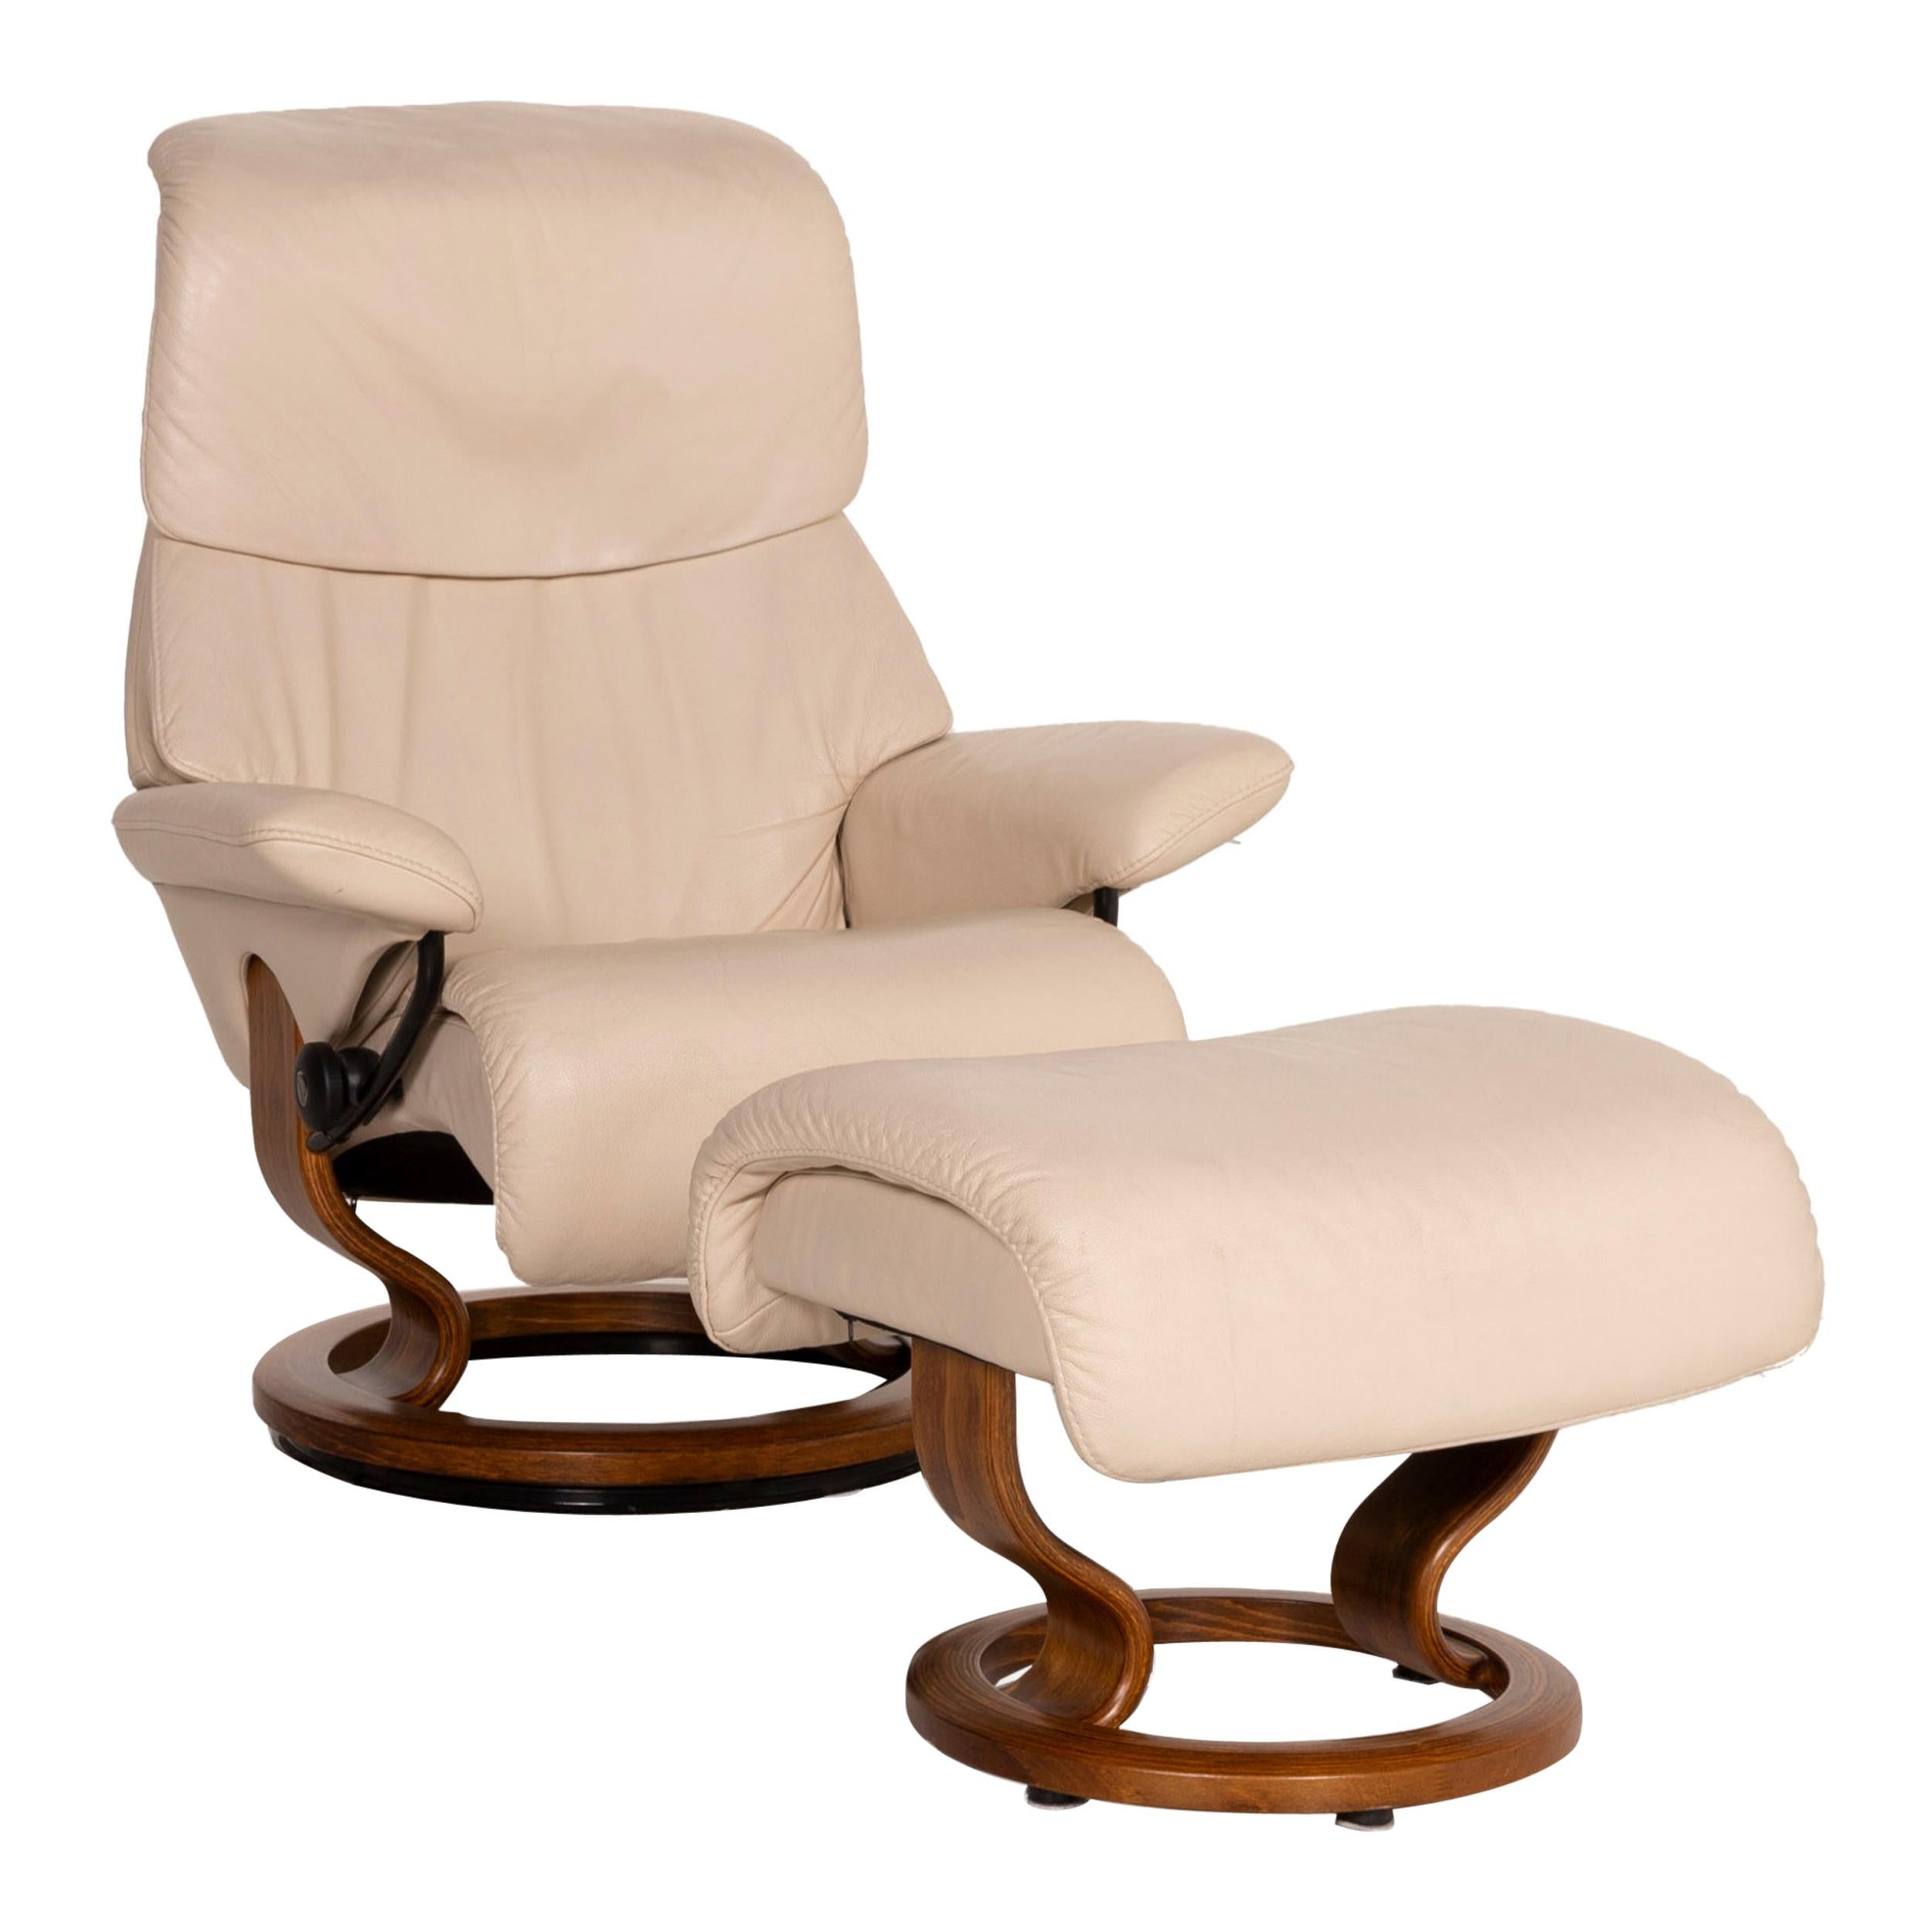 Stressless Vision Leather Armchair Cream Incl. Stool Relaxation Function